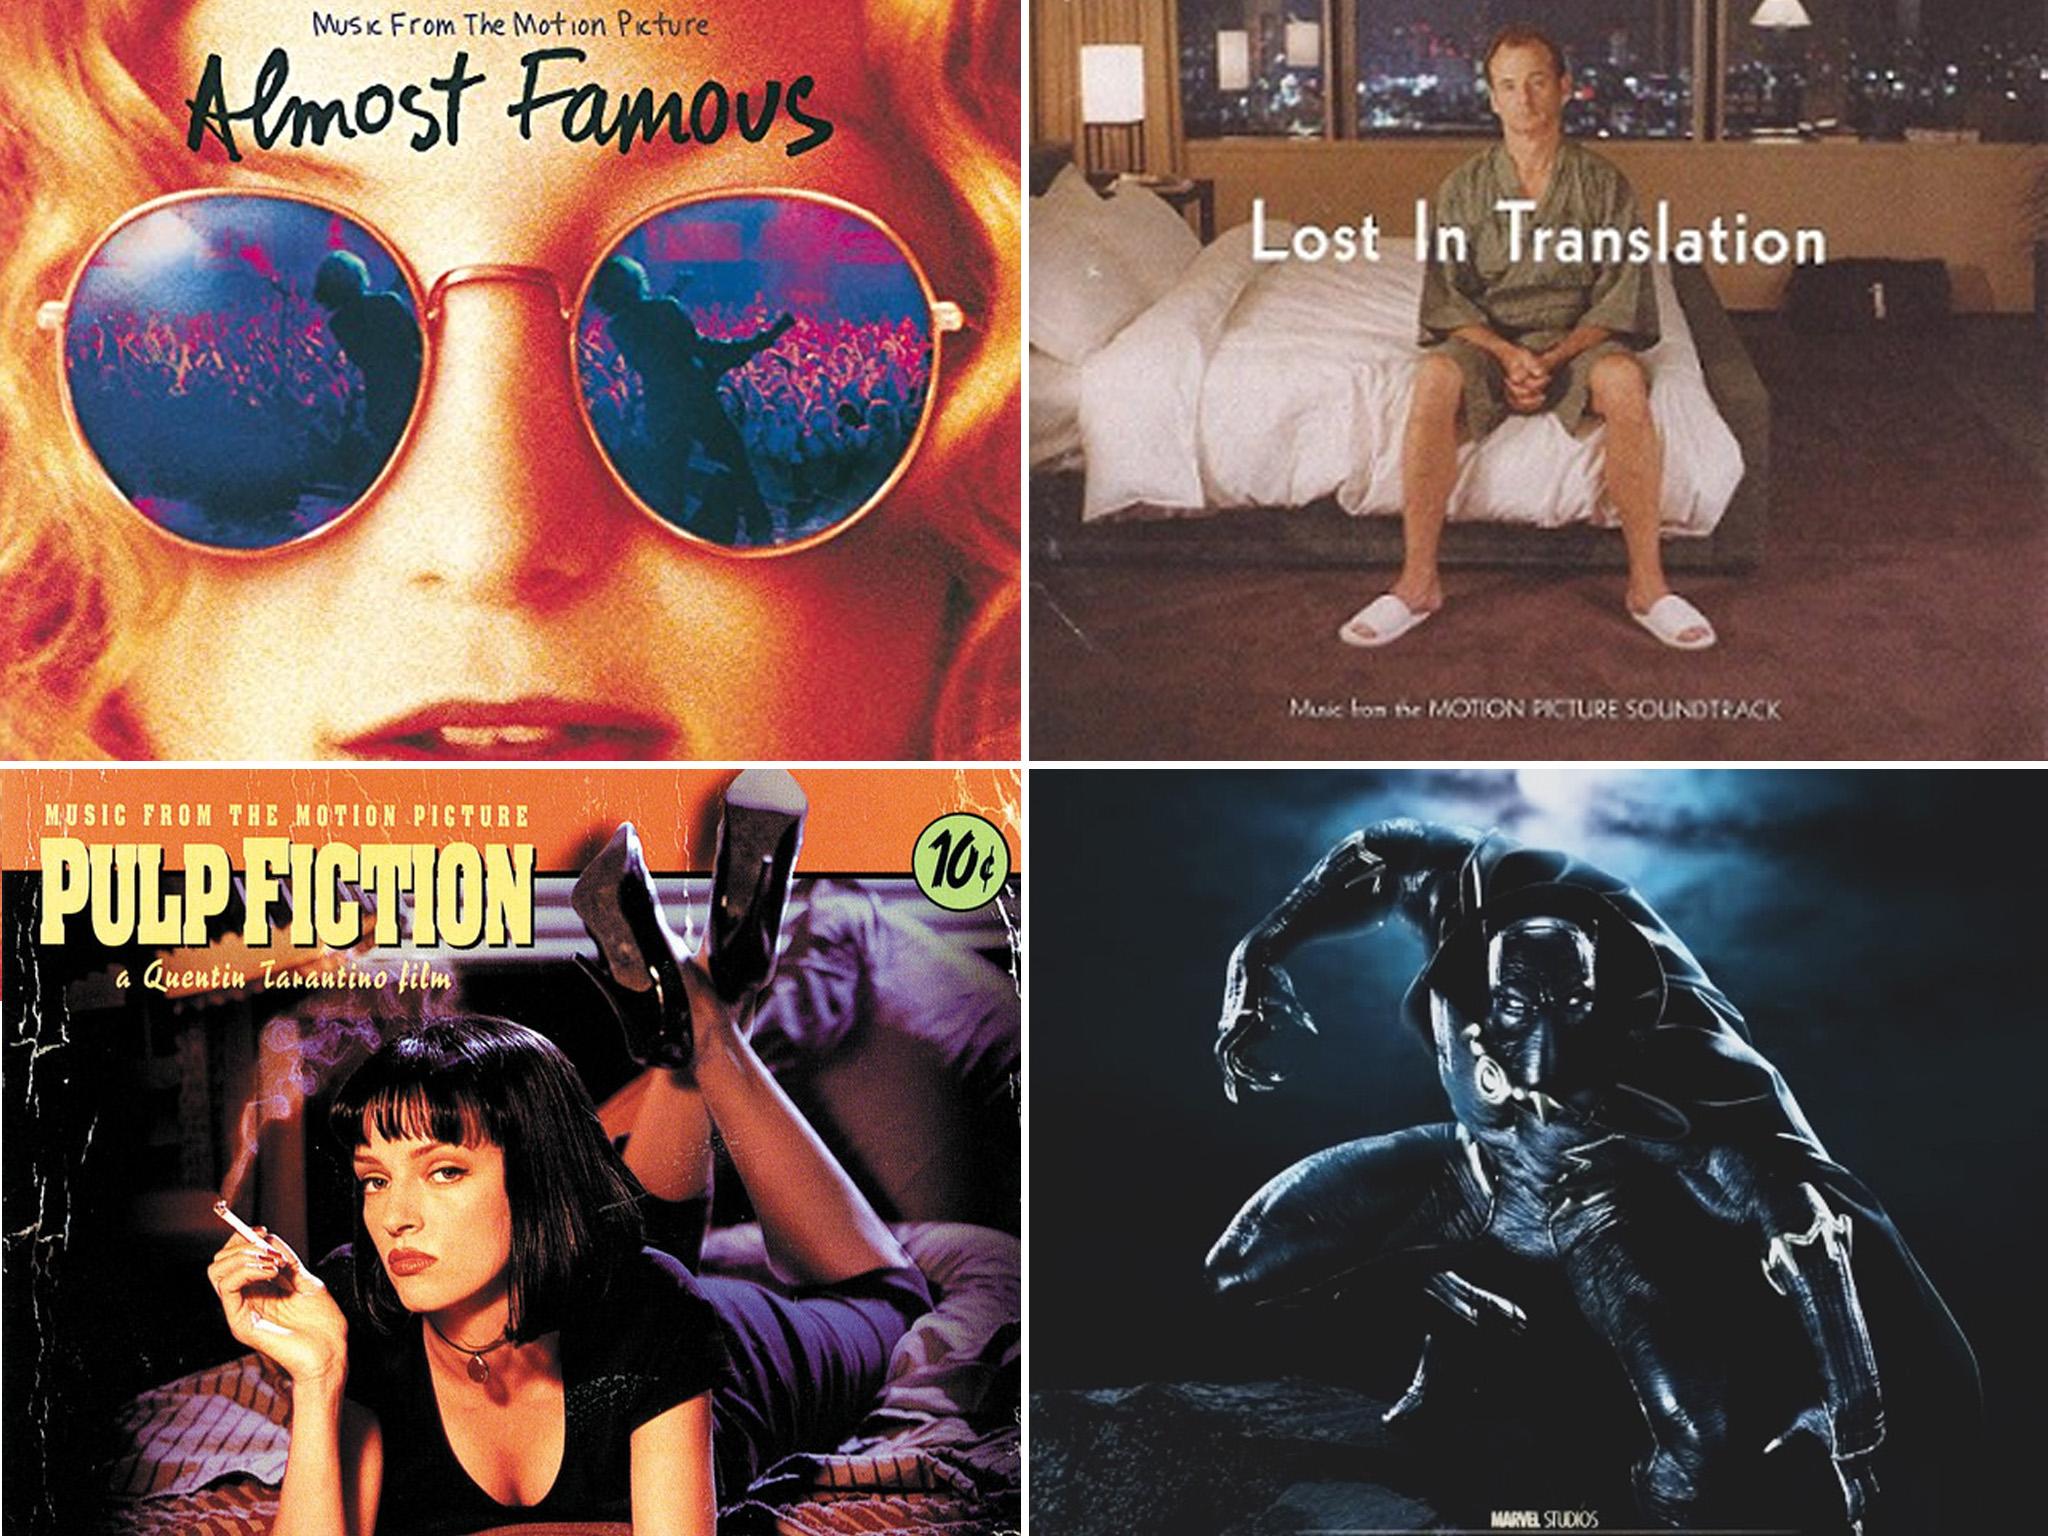 The 40 Greatest Film Soundtracks From Pulp Fiction To Almost